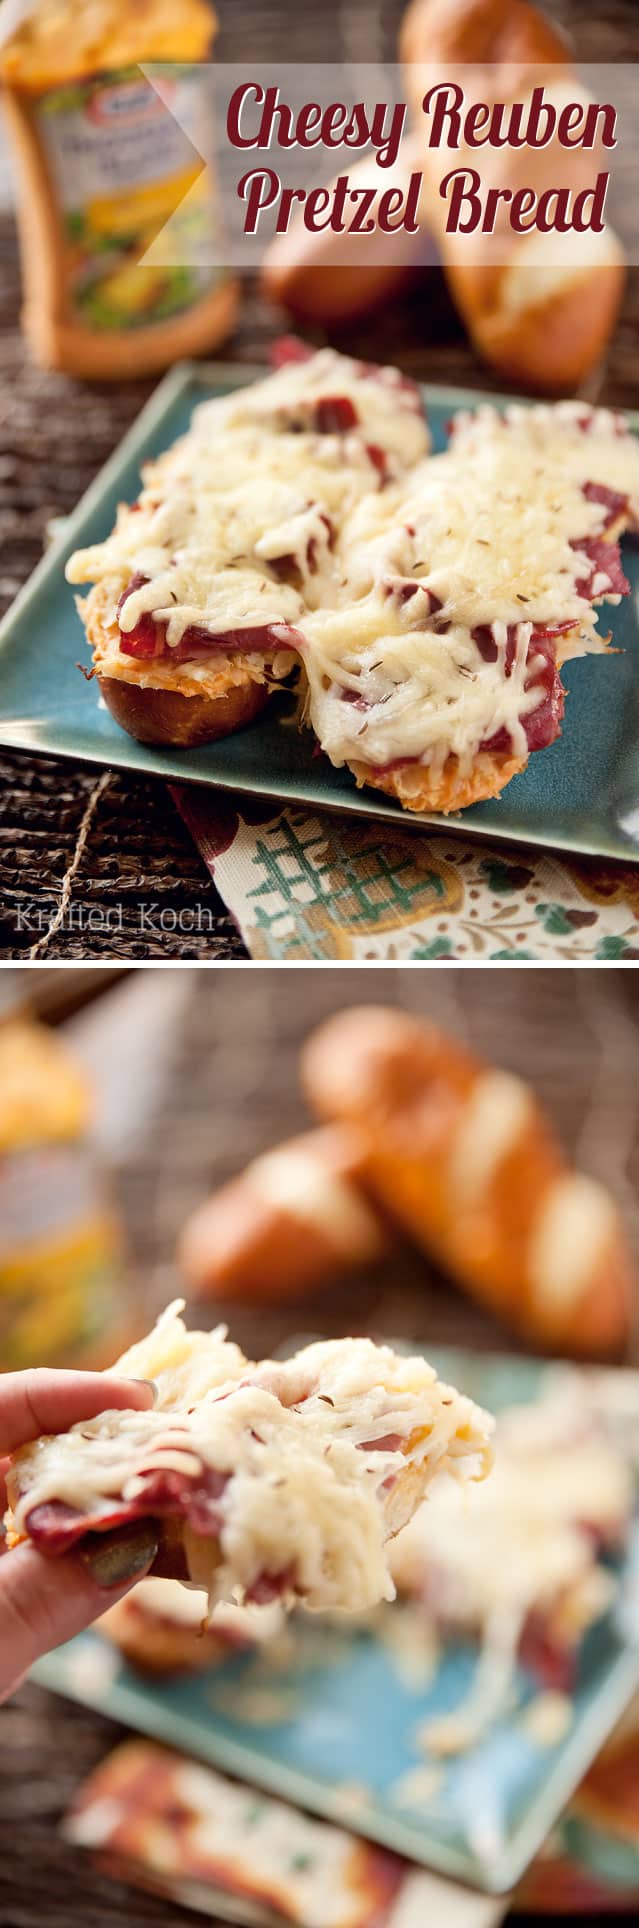 Cheesy Reuben Pretzel Bread - Krafted Koch - A simple and flavorful recipe that makes for a simple weeknight dinner.